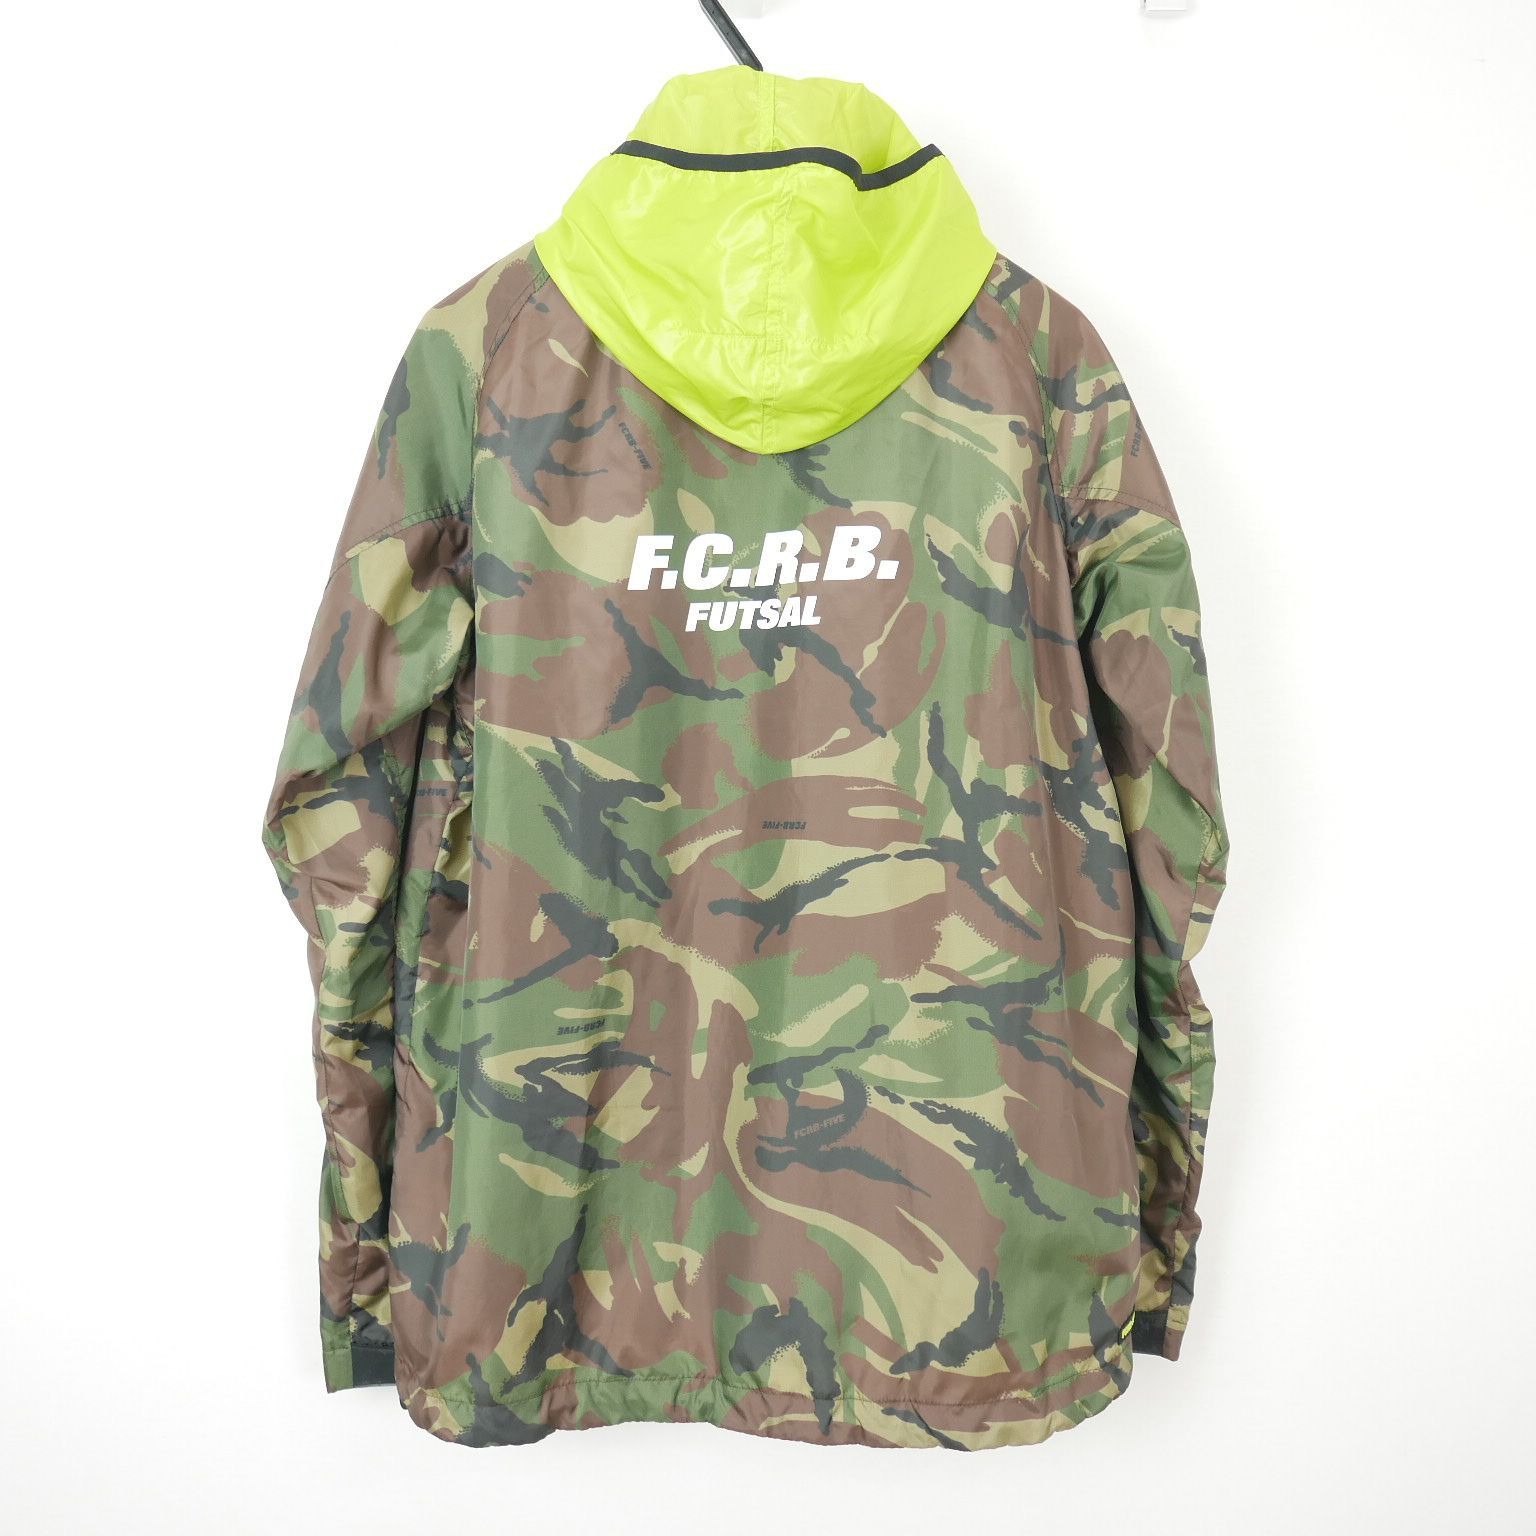 F.C.Real Bristol ブリストル NIKE FCRB FIVE WARM UP JACKET ナイロン 